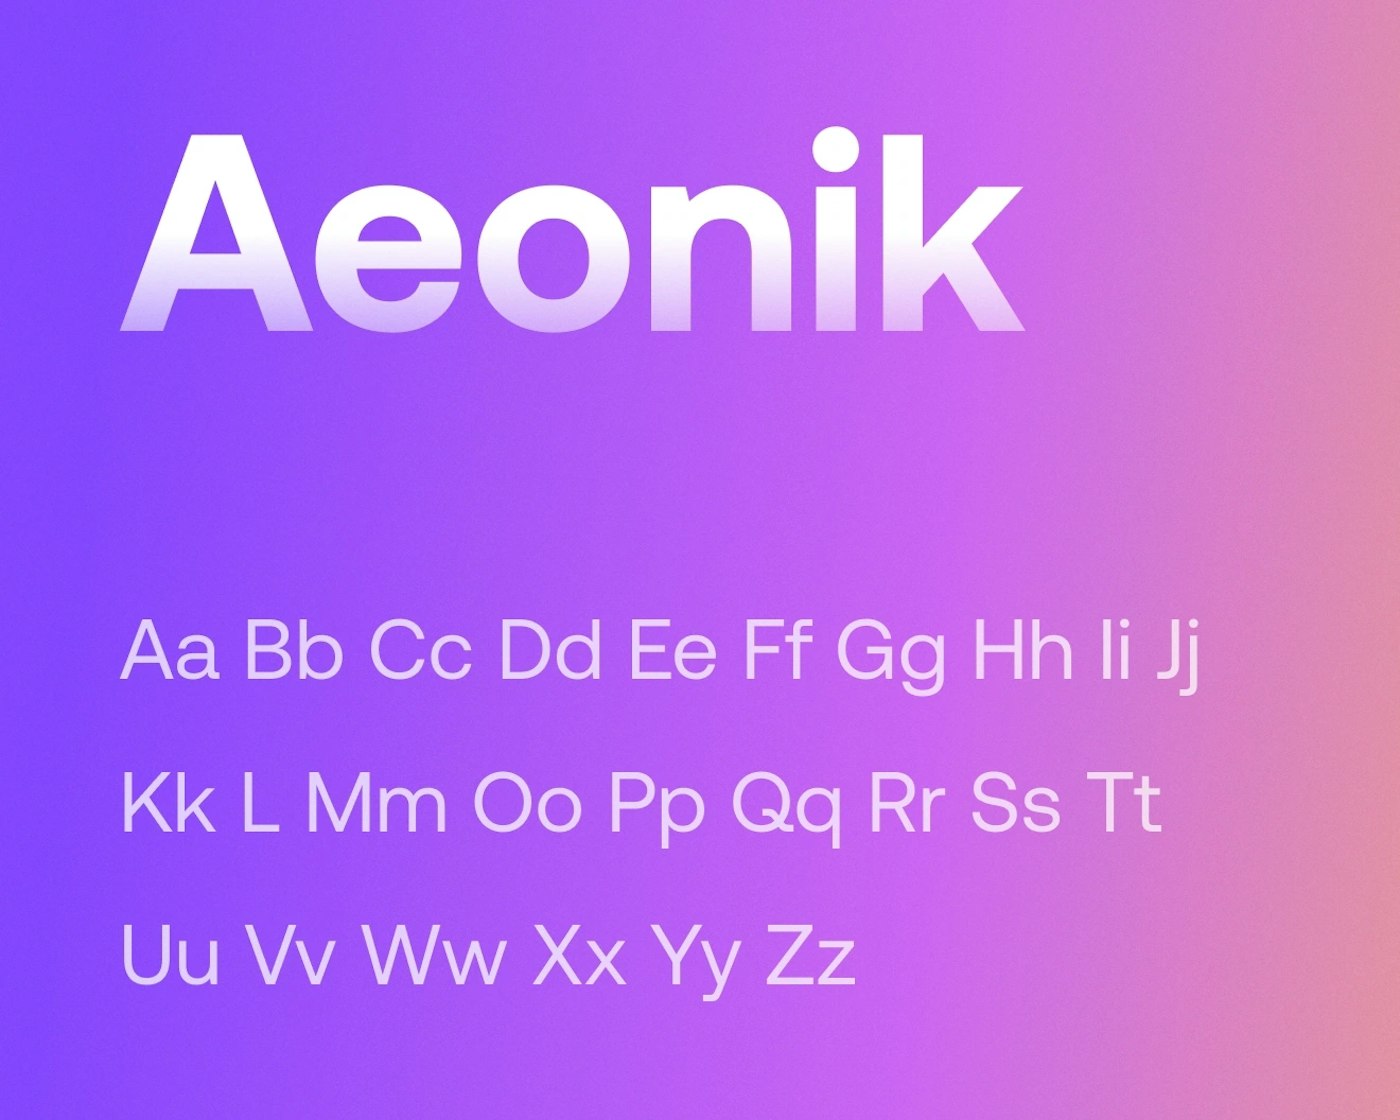 Purple to pink gradient background with a large text, set in light purple to white gradient, on top that reads 'Aeonik'. Beneath that text are pairs of uppercase and lowercase versions of each letter of the alphabet.